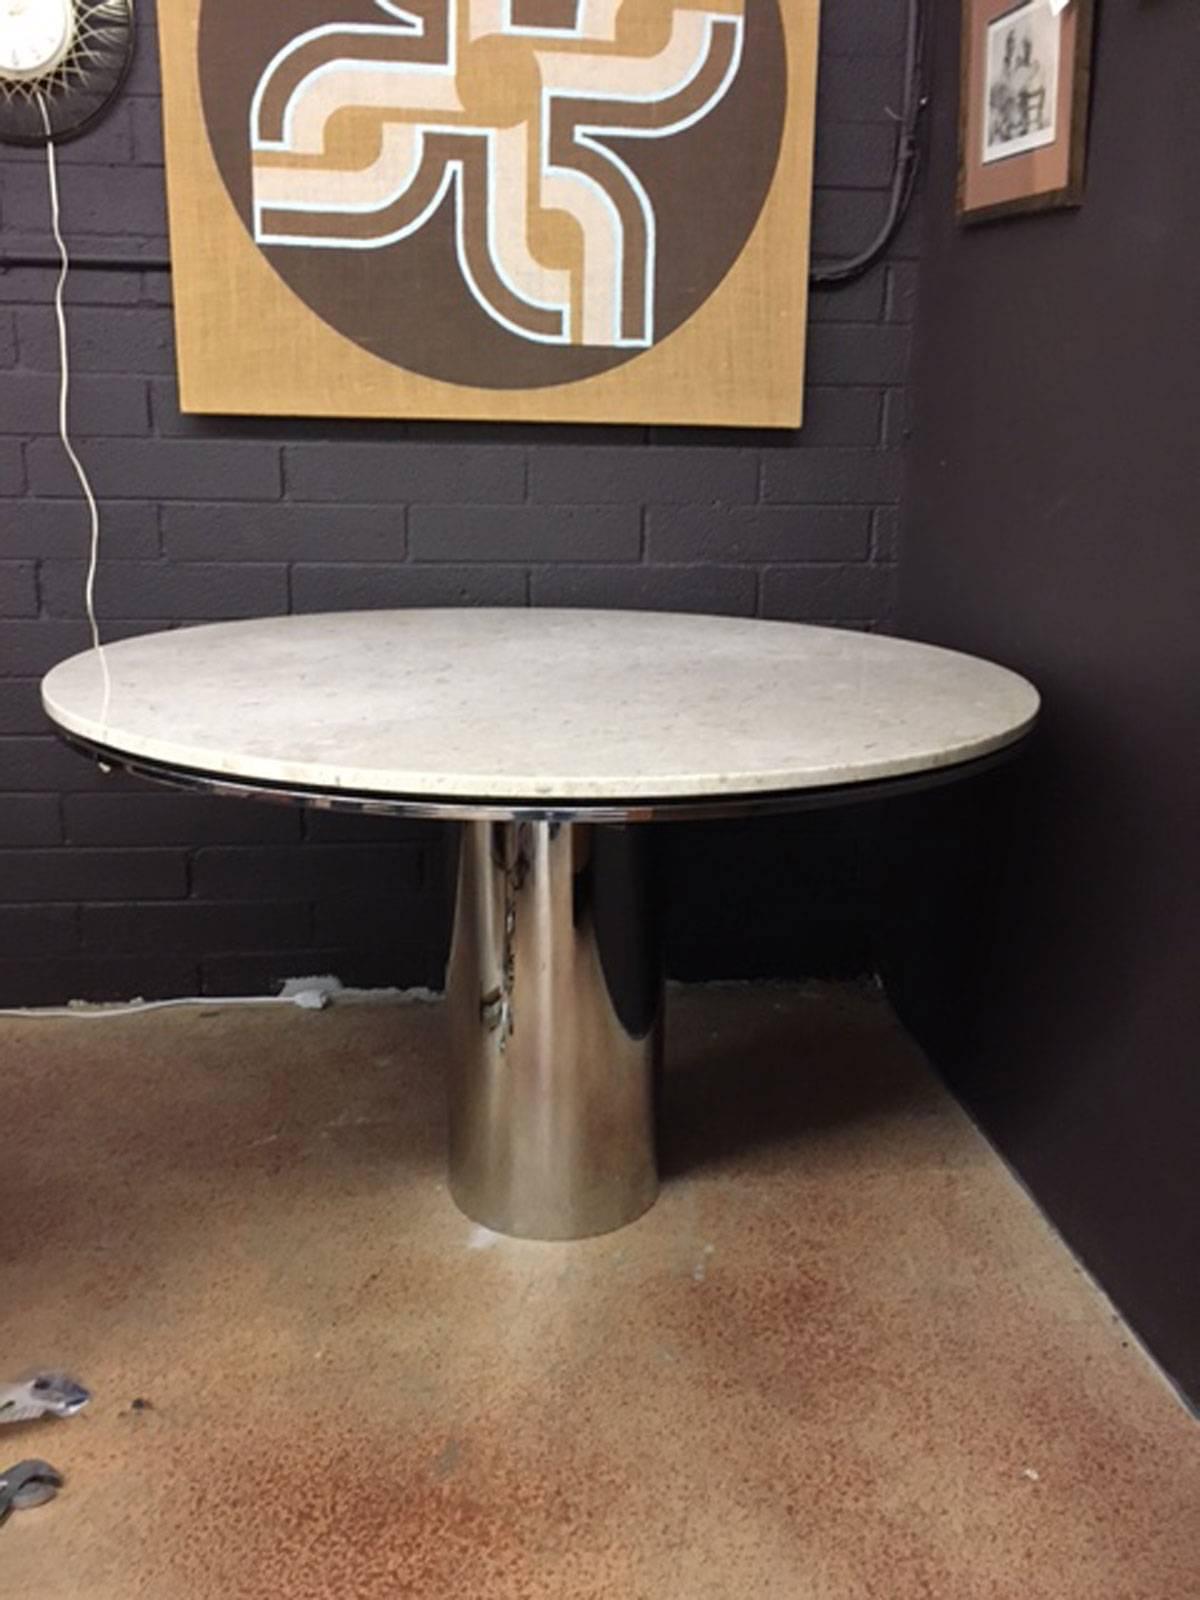 Brueton Anello table in marble and chrome. Notice the separation between the marble top and the chrome directly below the marble. Neat floating aspect. The base is a seamless chromed stainless steel column that slips over a heavy steel structural